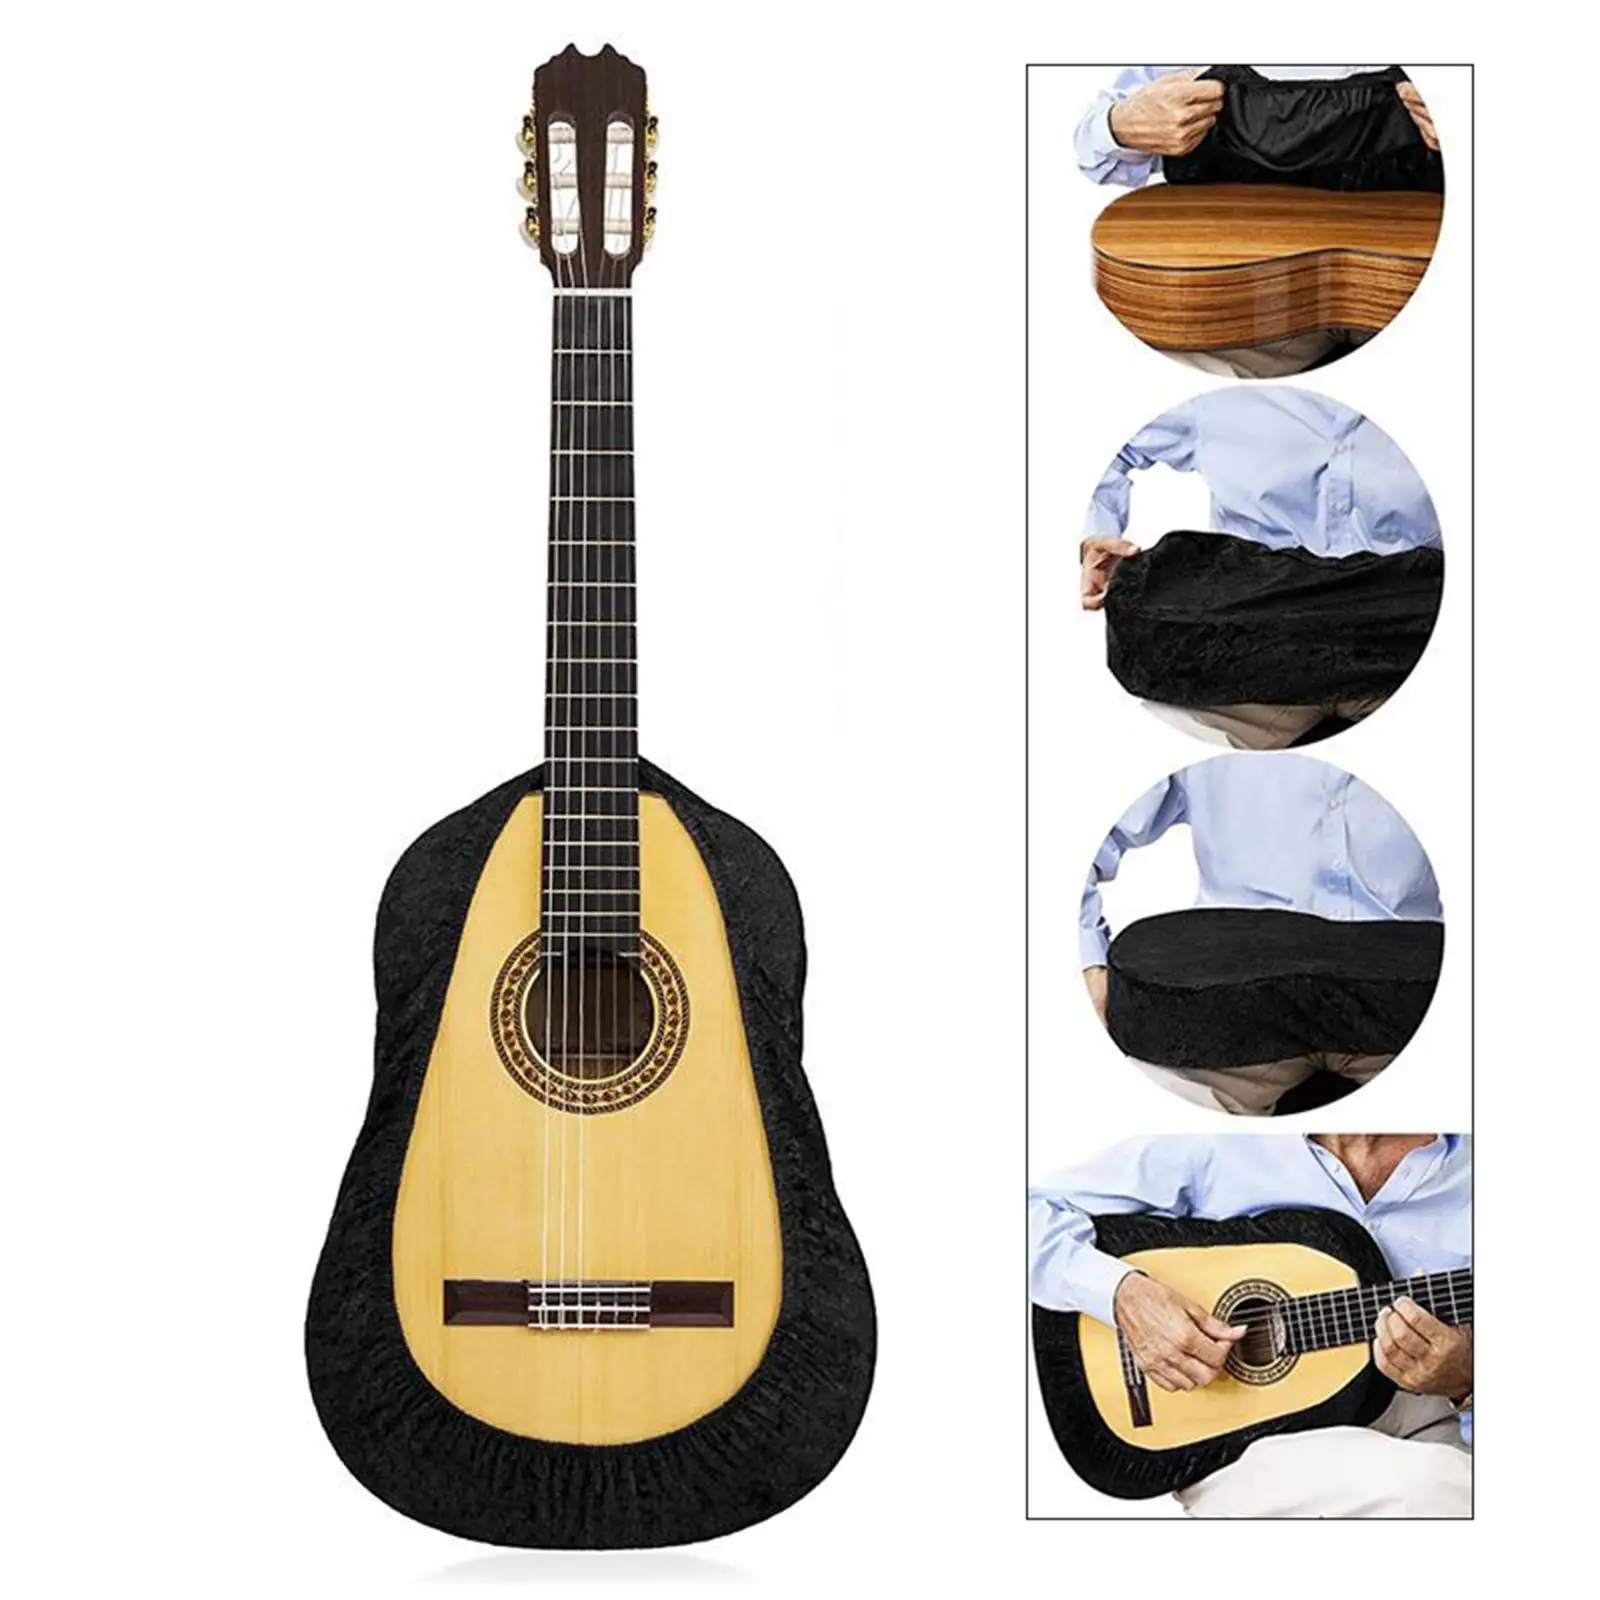 Guitar Cover, Guitar Protector, Guitar Gig Bag, Protective Sleeve for Acoustic,